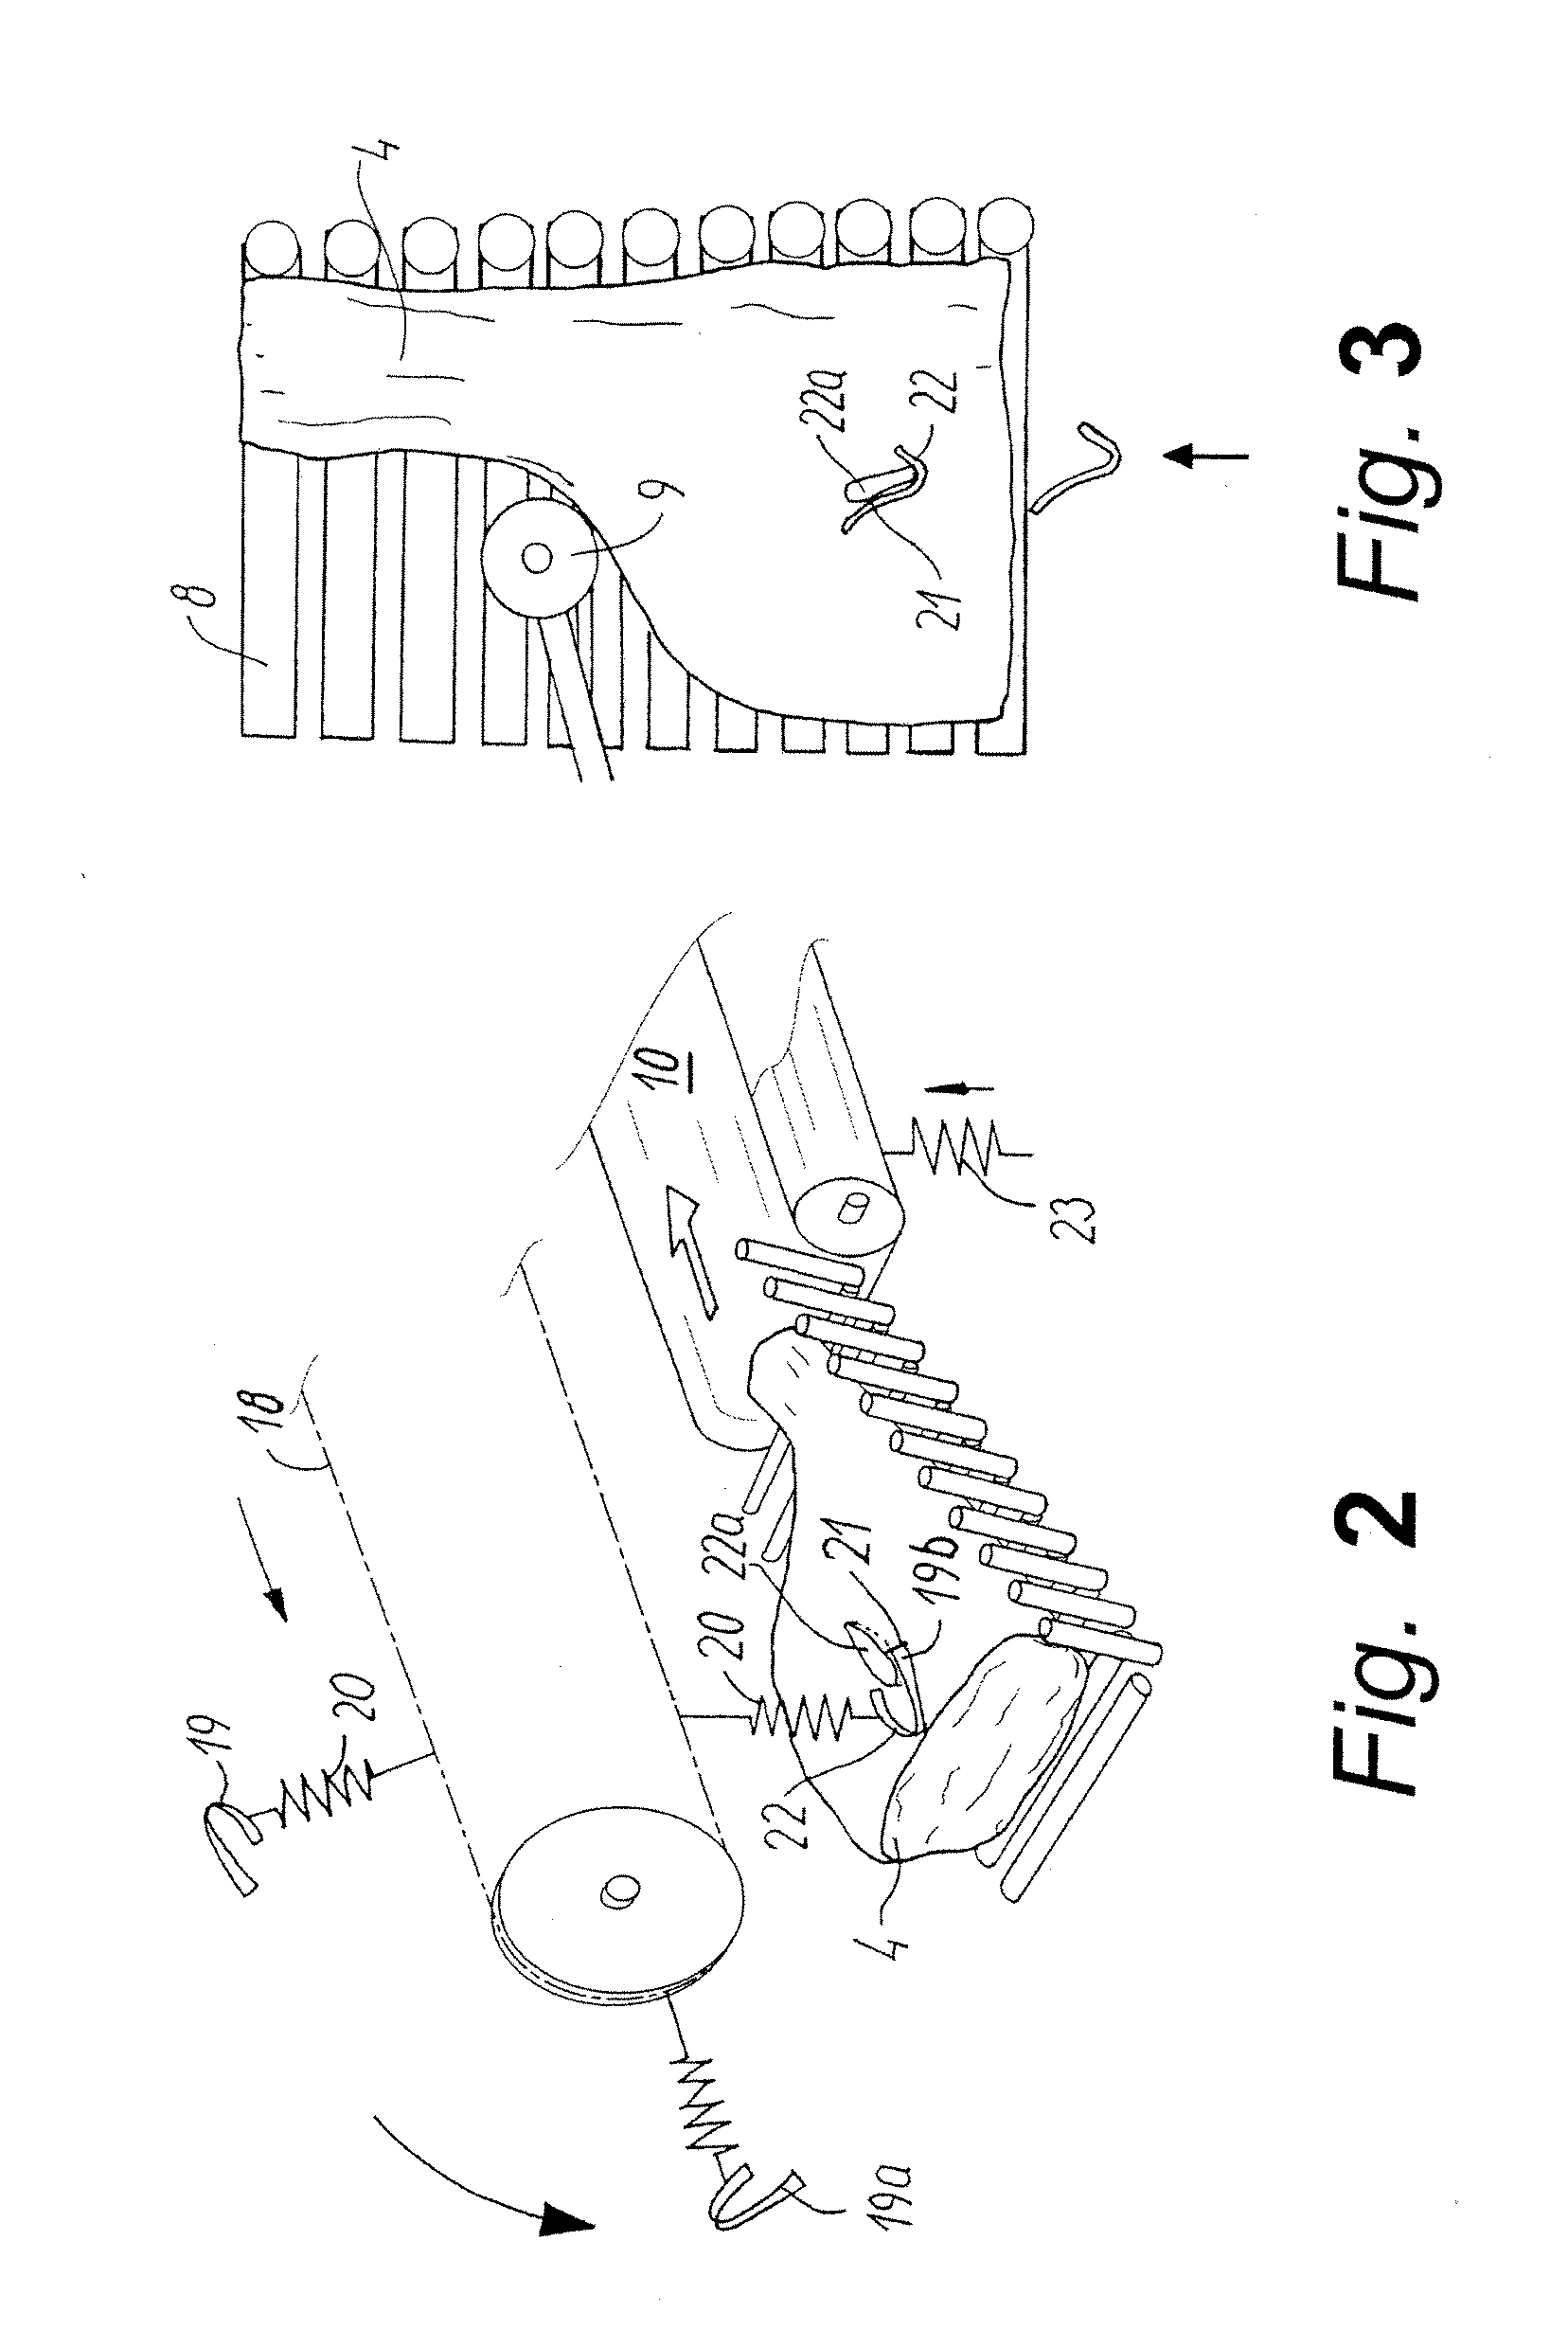 Method for automatic cutting of hams, and an apparatus for automatic cutting of hams